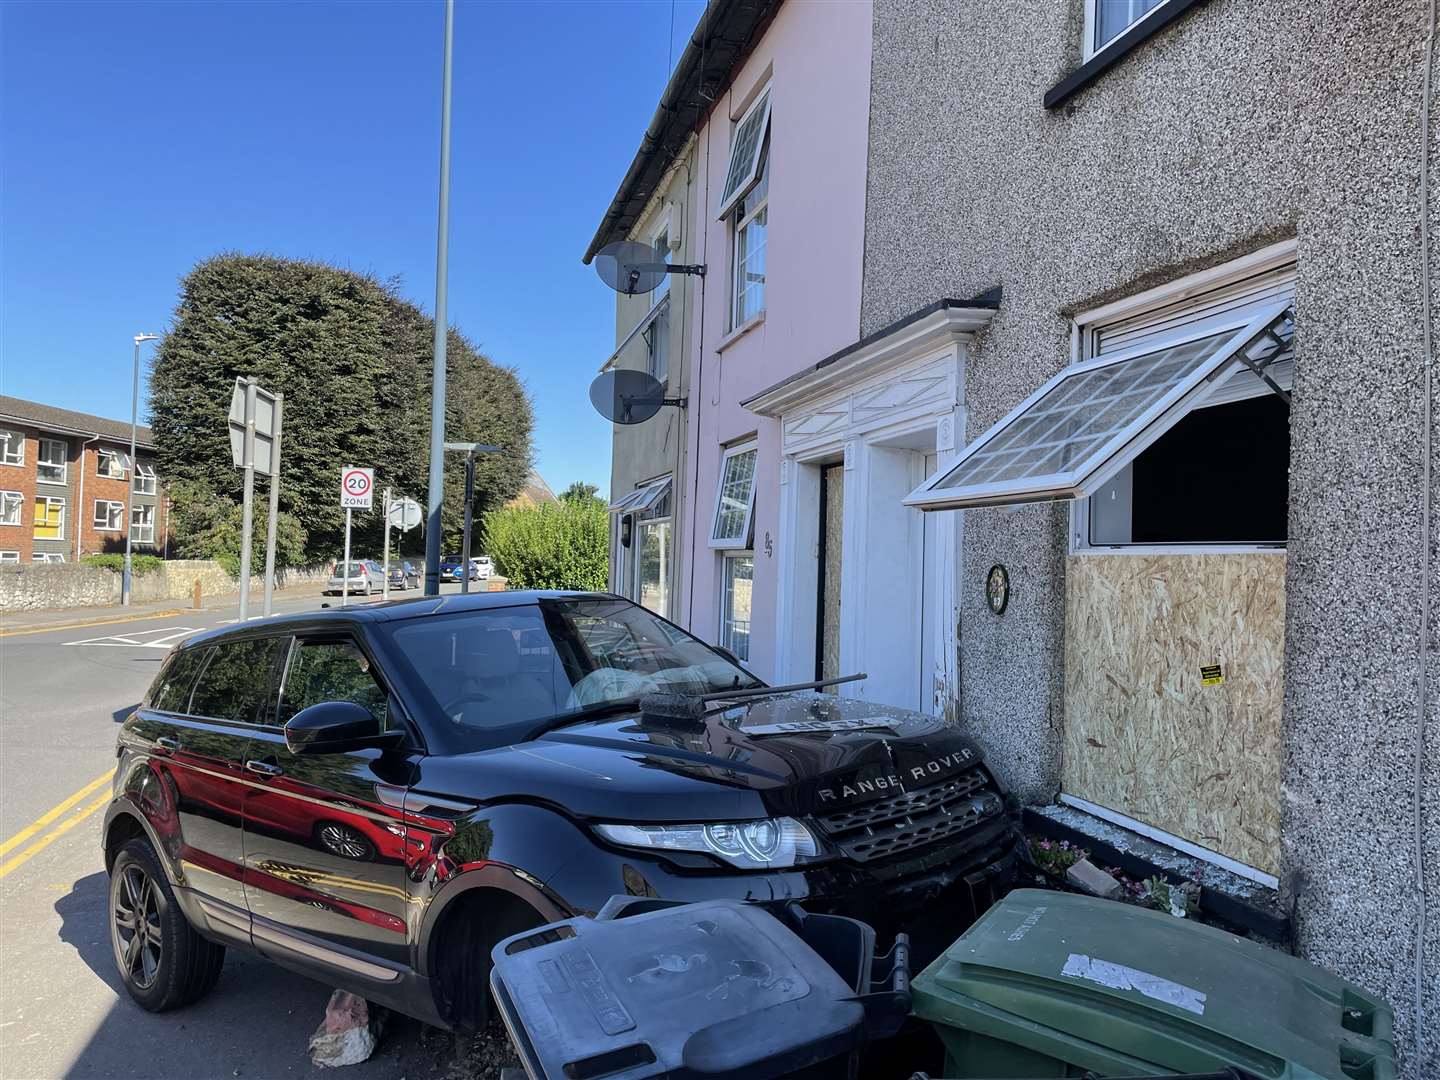 A suspected drunk driver has been arrested after a Range Rover ploughed into homes in Lower Boxley Road, Maidstone (62408412)